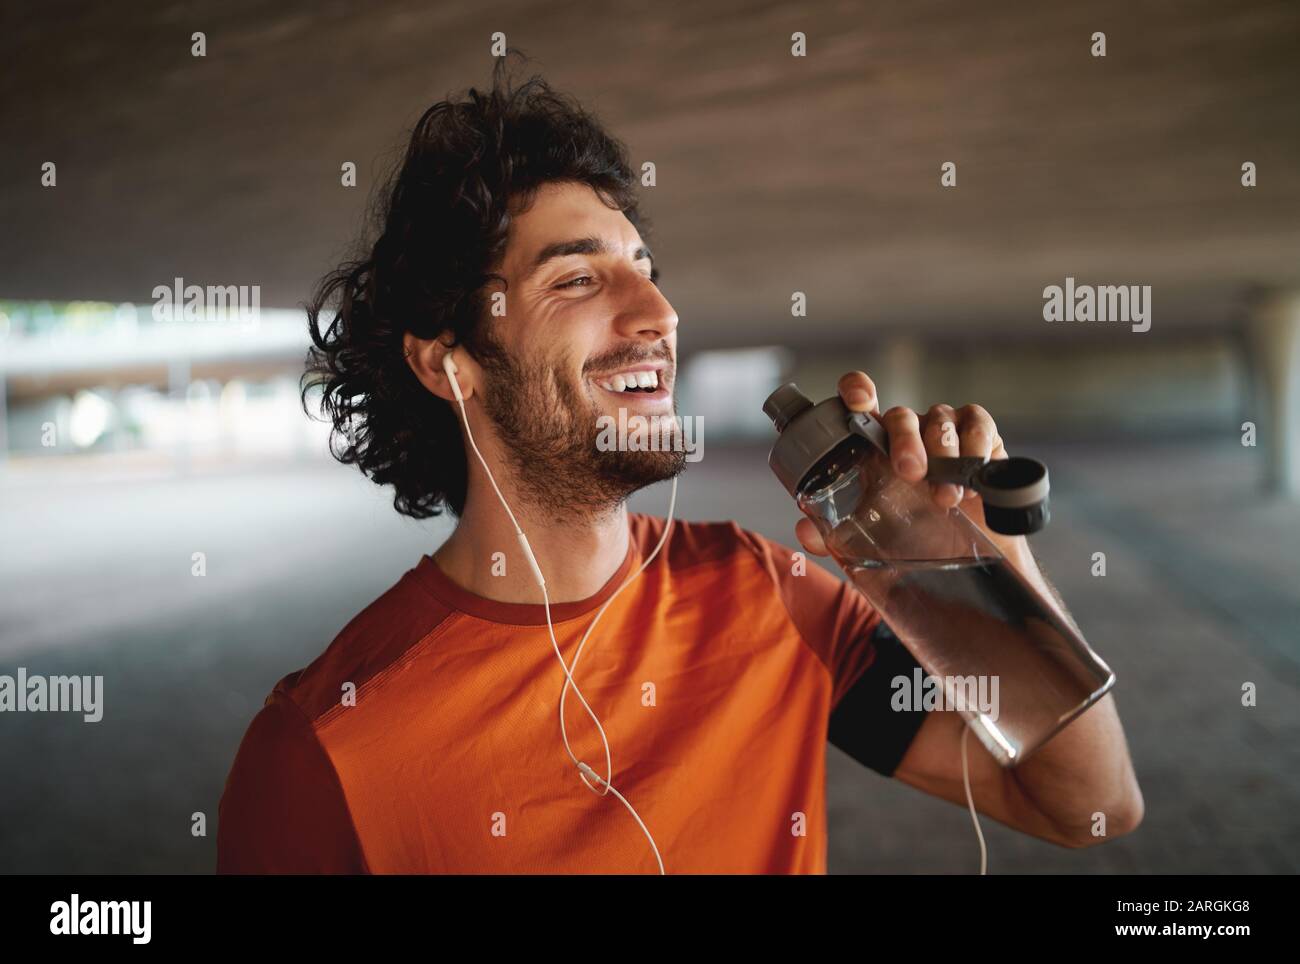 Portrait of a smiling cheerful young man with earphones drinking water from reusable bottle outdoors in the city Stock Photo